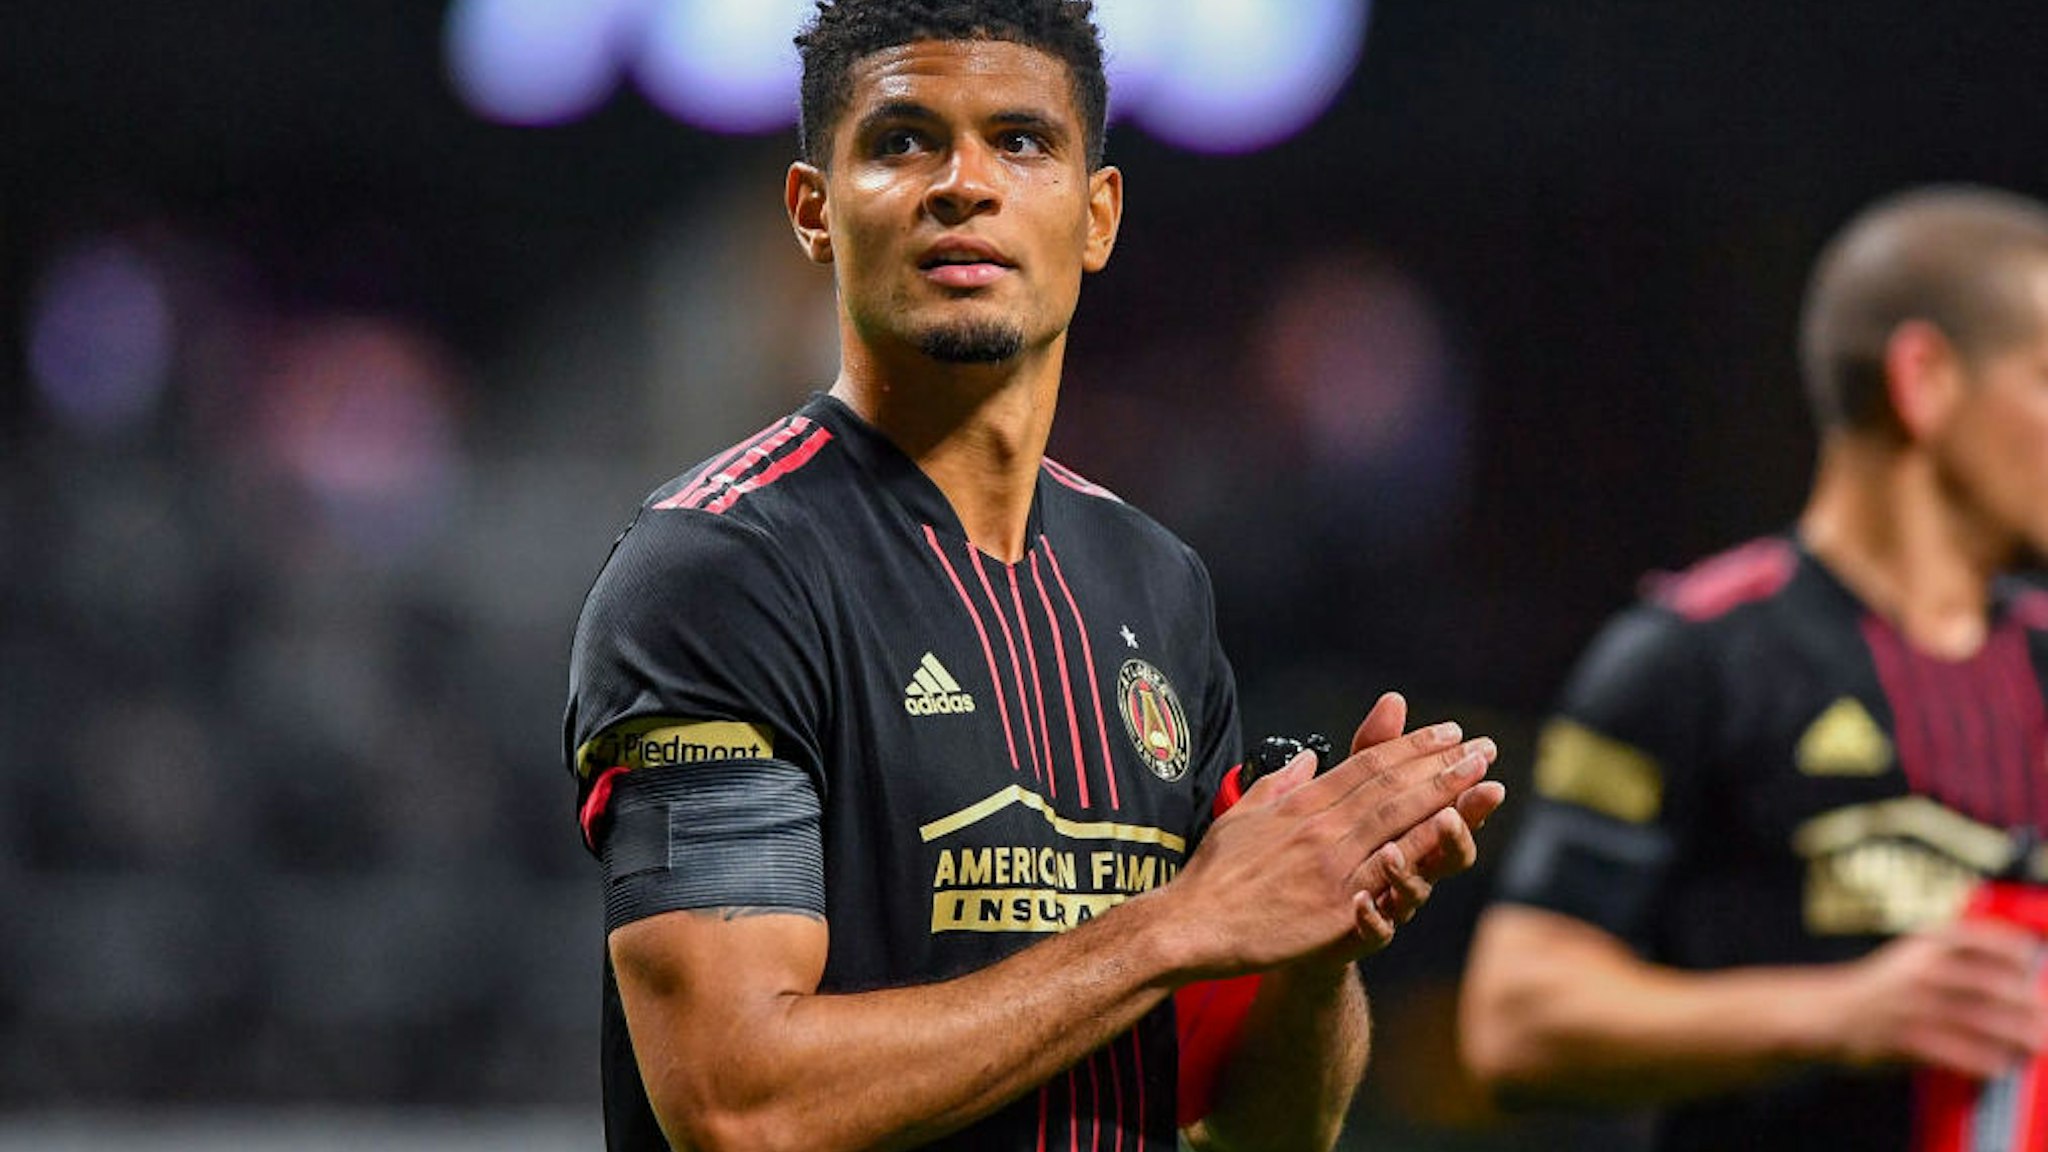 Atlanta defender Miles Robinson (12) thanks the fans following the conclusion of the MLS match between Sporting Kansas City and Atlanta United FC on February 27th, 2022 at Mercedes-Benz Stadium in Atlanta, GA.